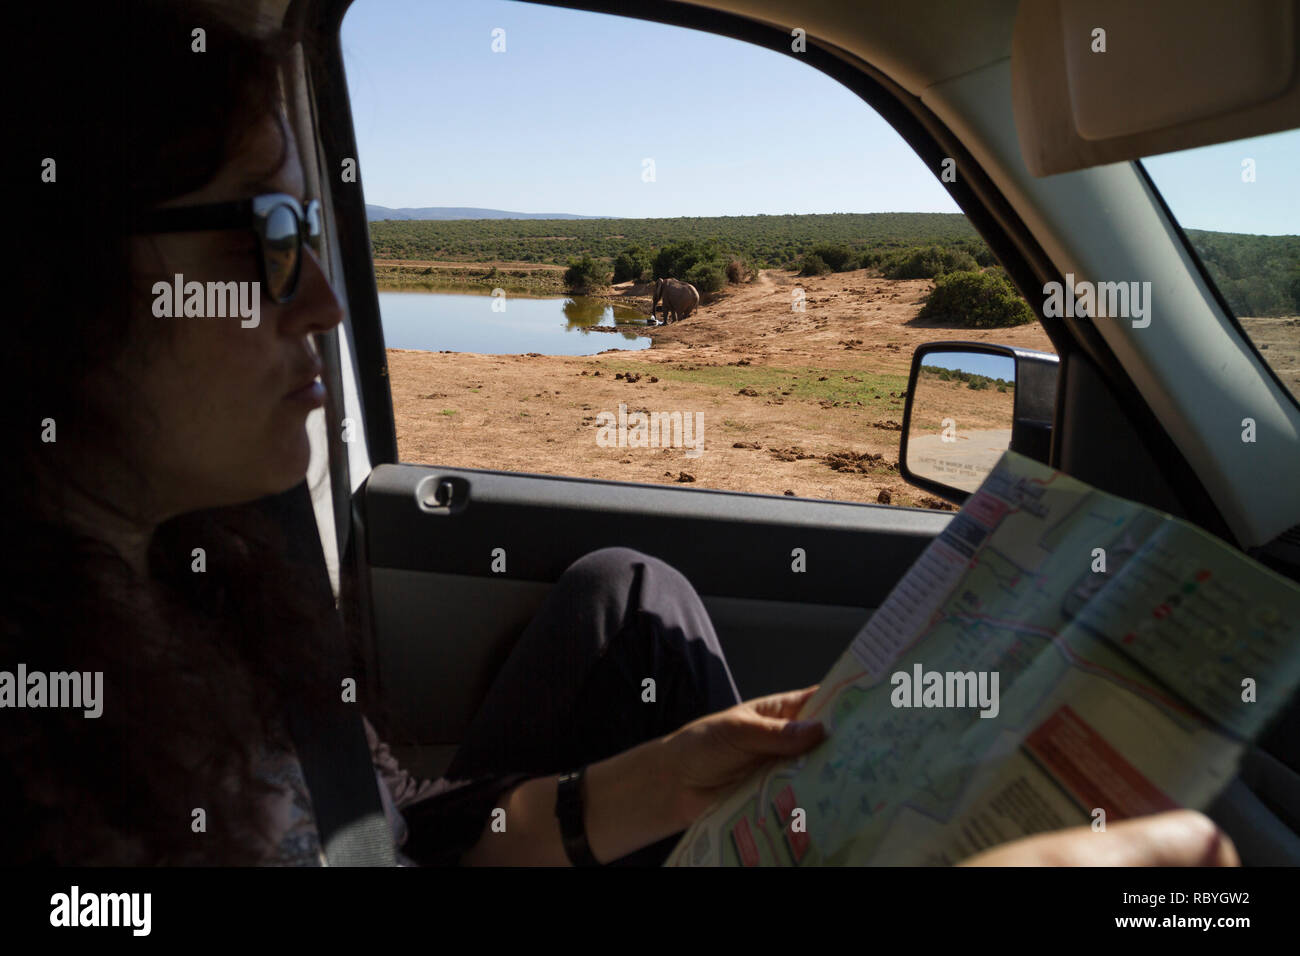 Passenger in car on safari looking at the map of Addo Elephant National Park, South Africa Stock Photo